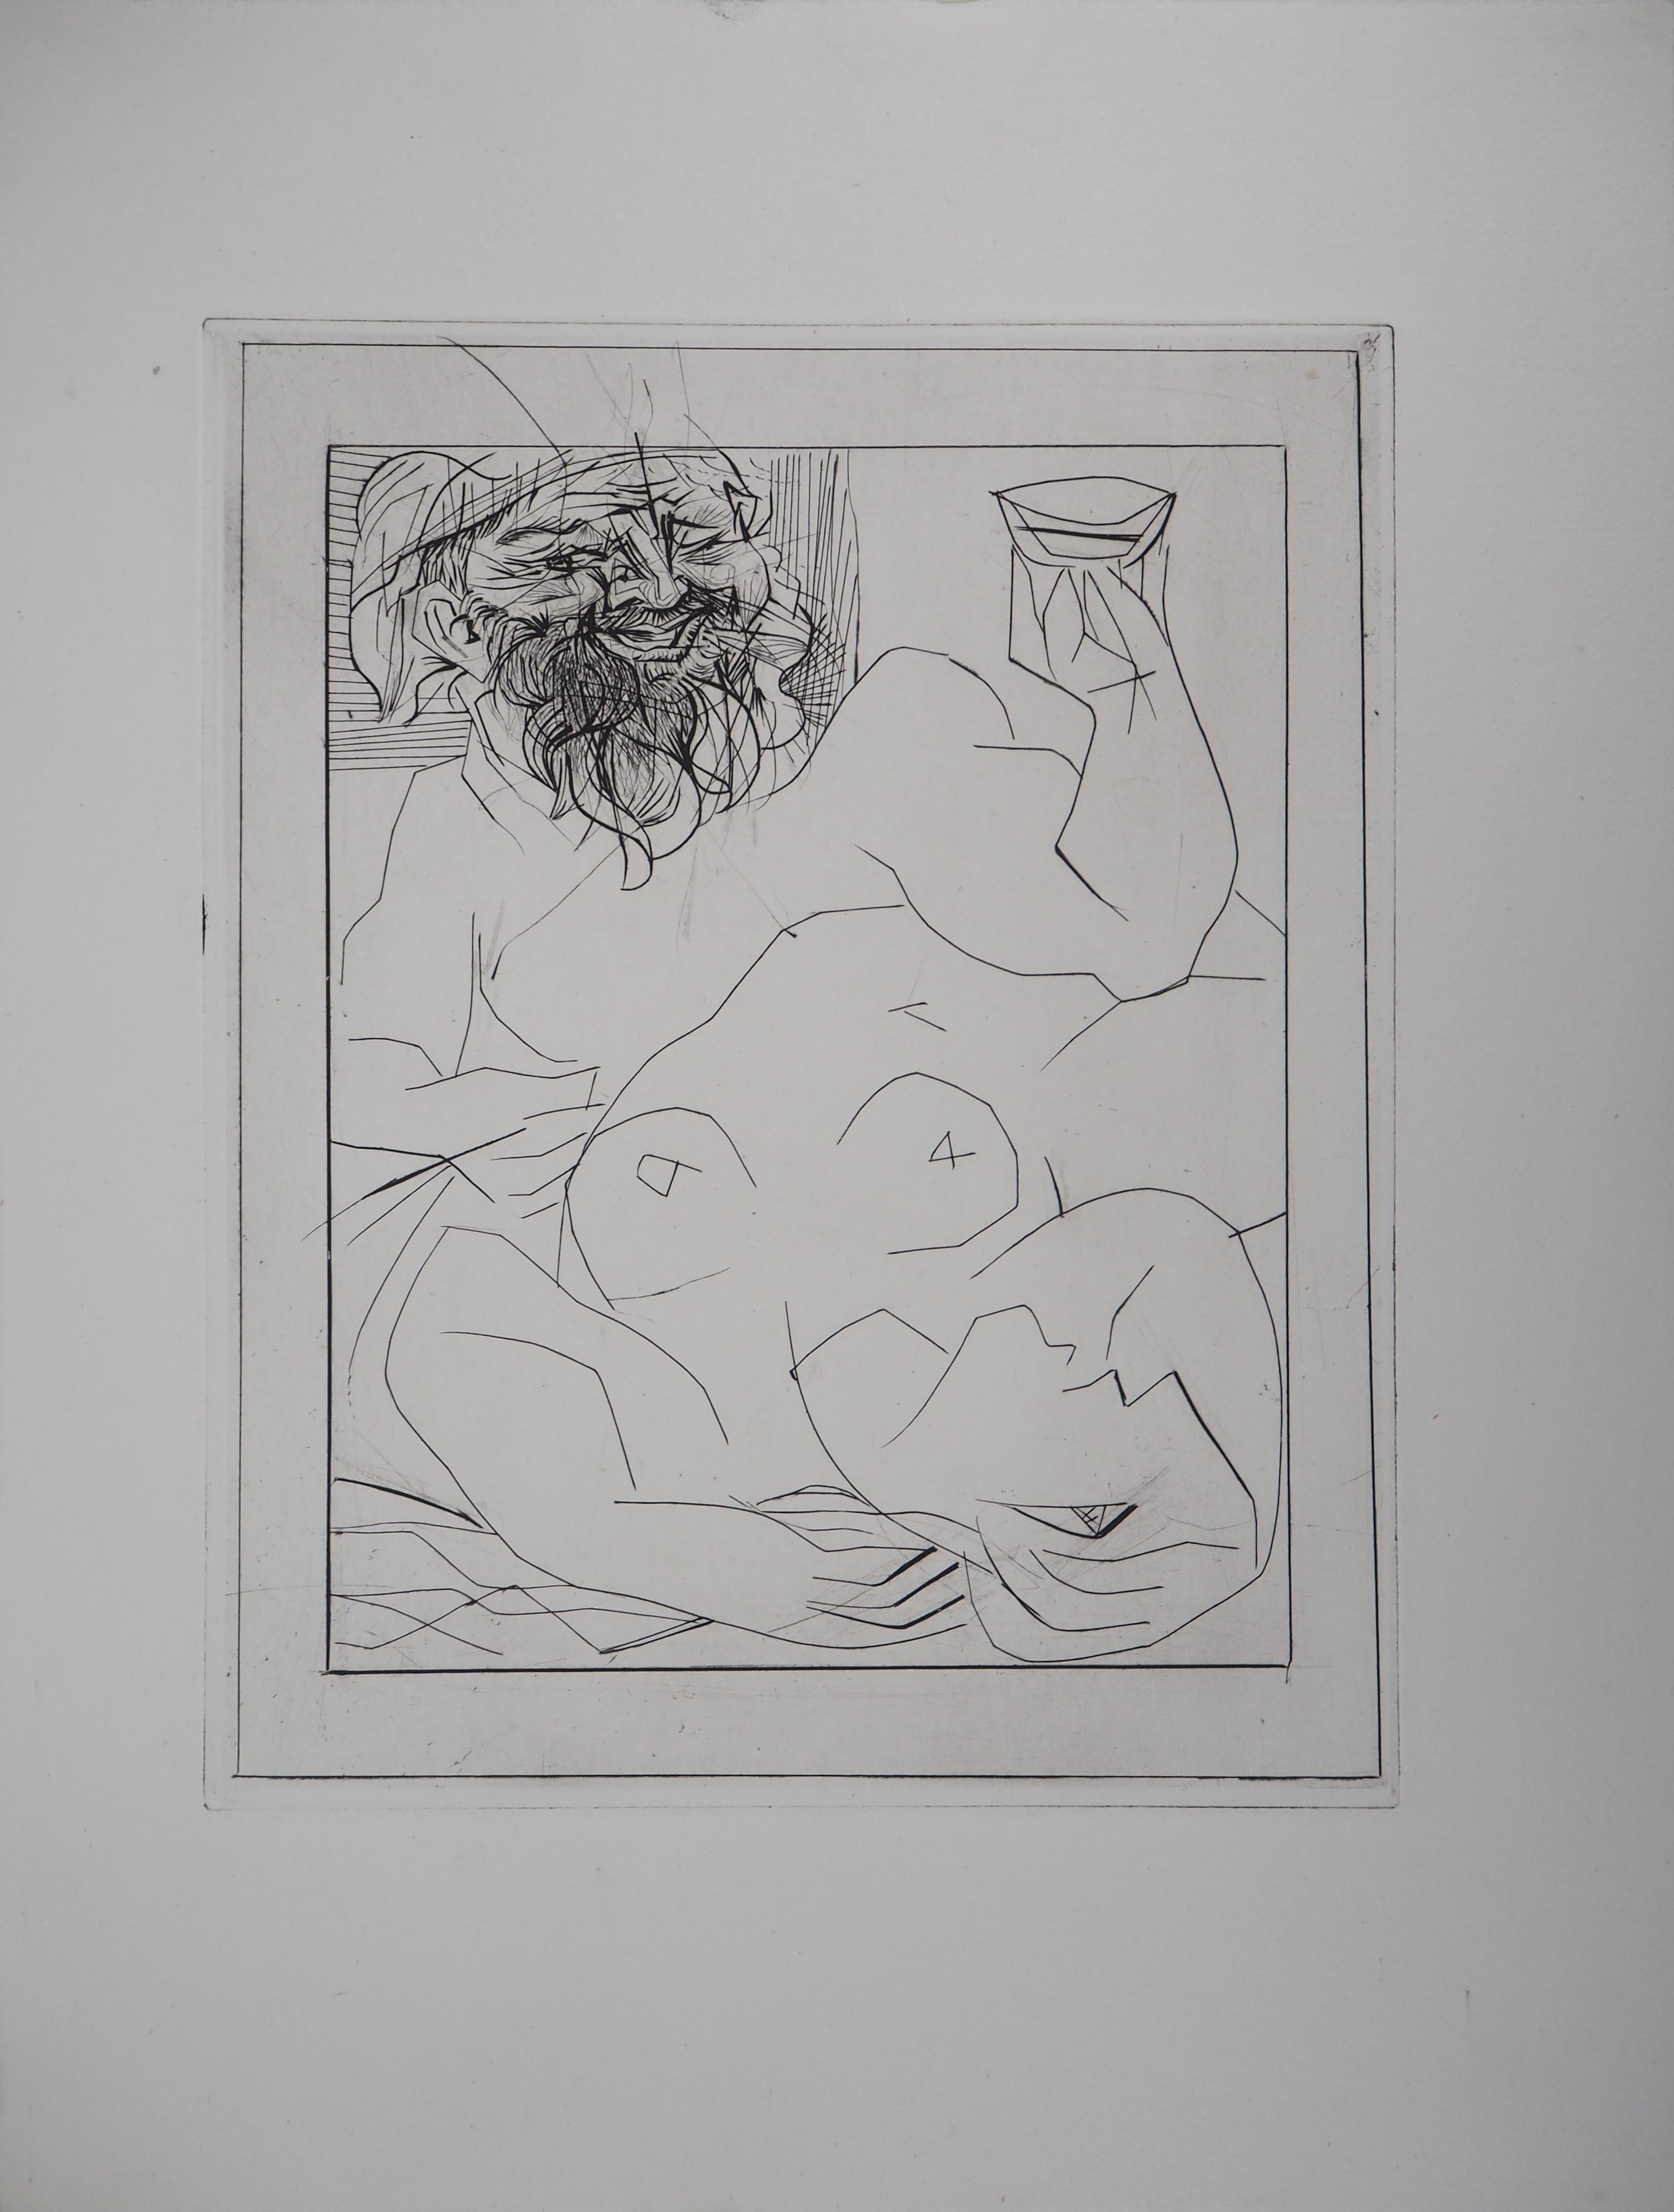 Bacchus and Reclining Nude - Original etching - Vollard edition - (Bloch #284) - Print by Pablo Picasso